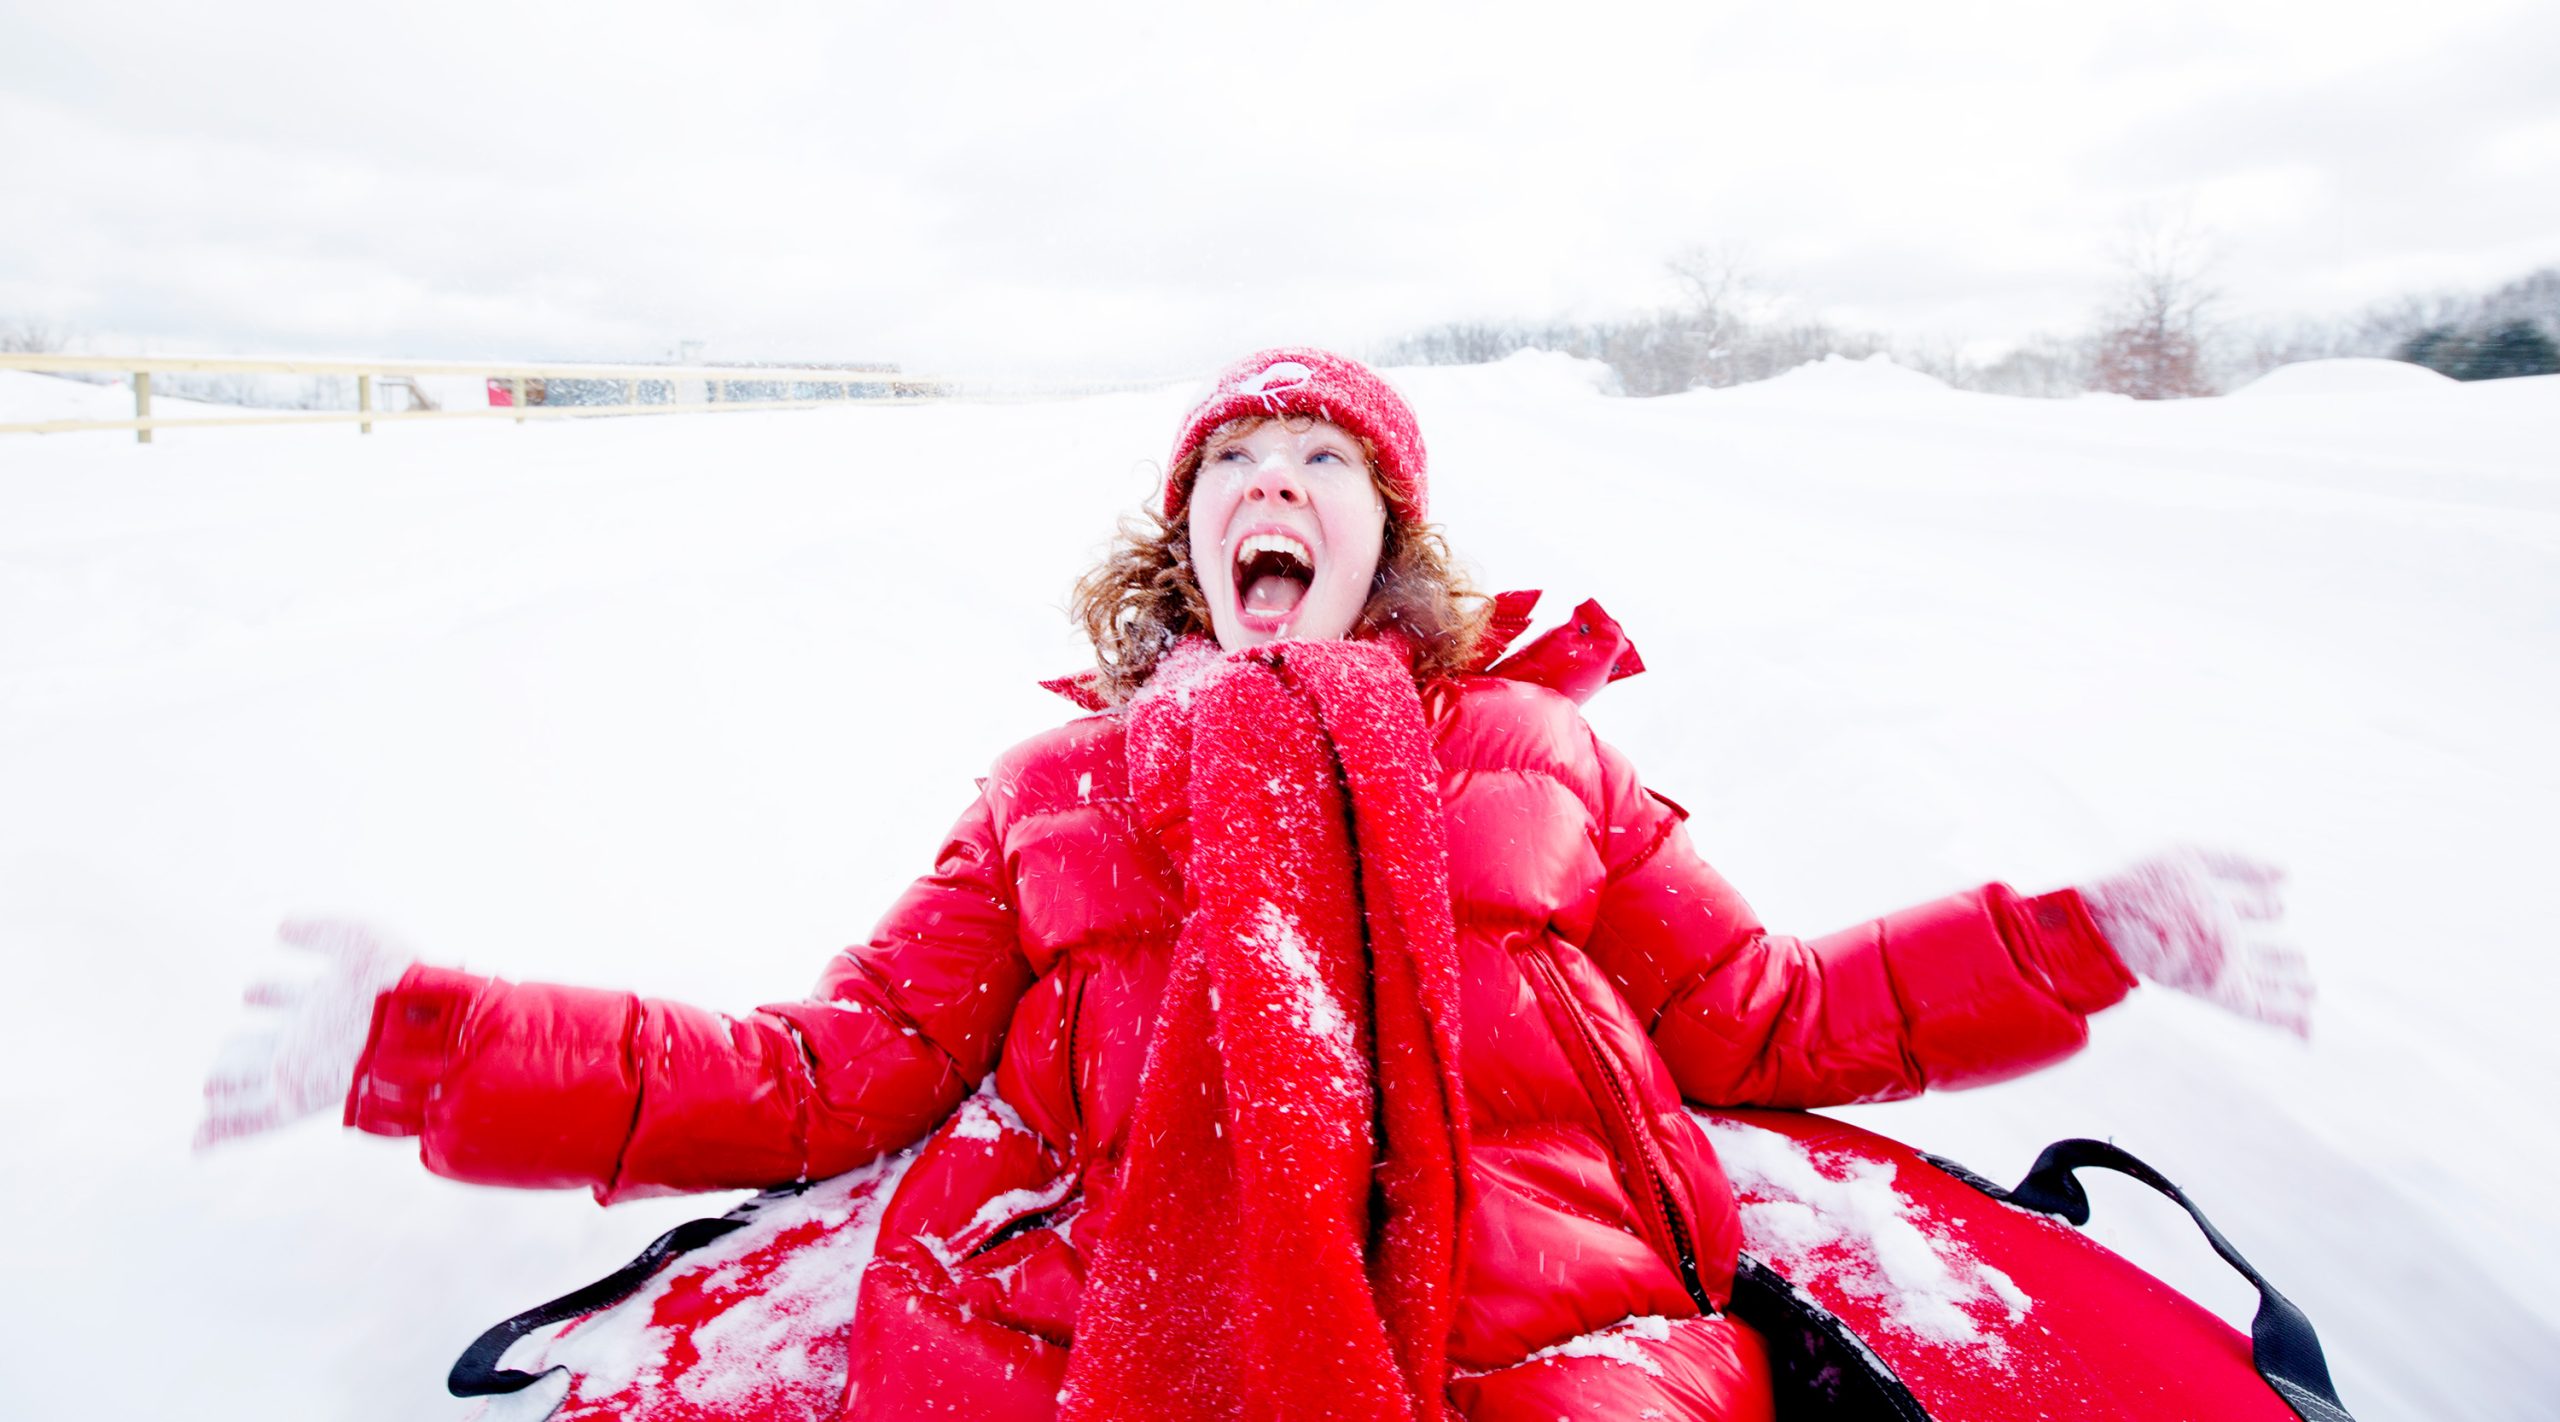 Red-haired woman in a red coat snow tubing down a hill at Nemacolin